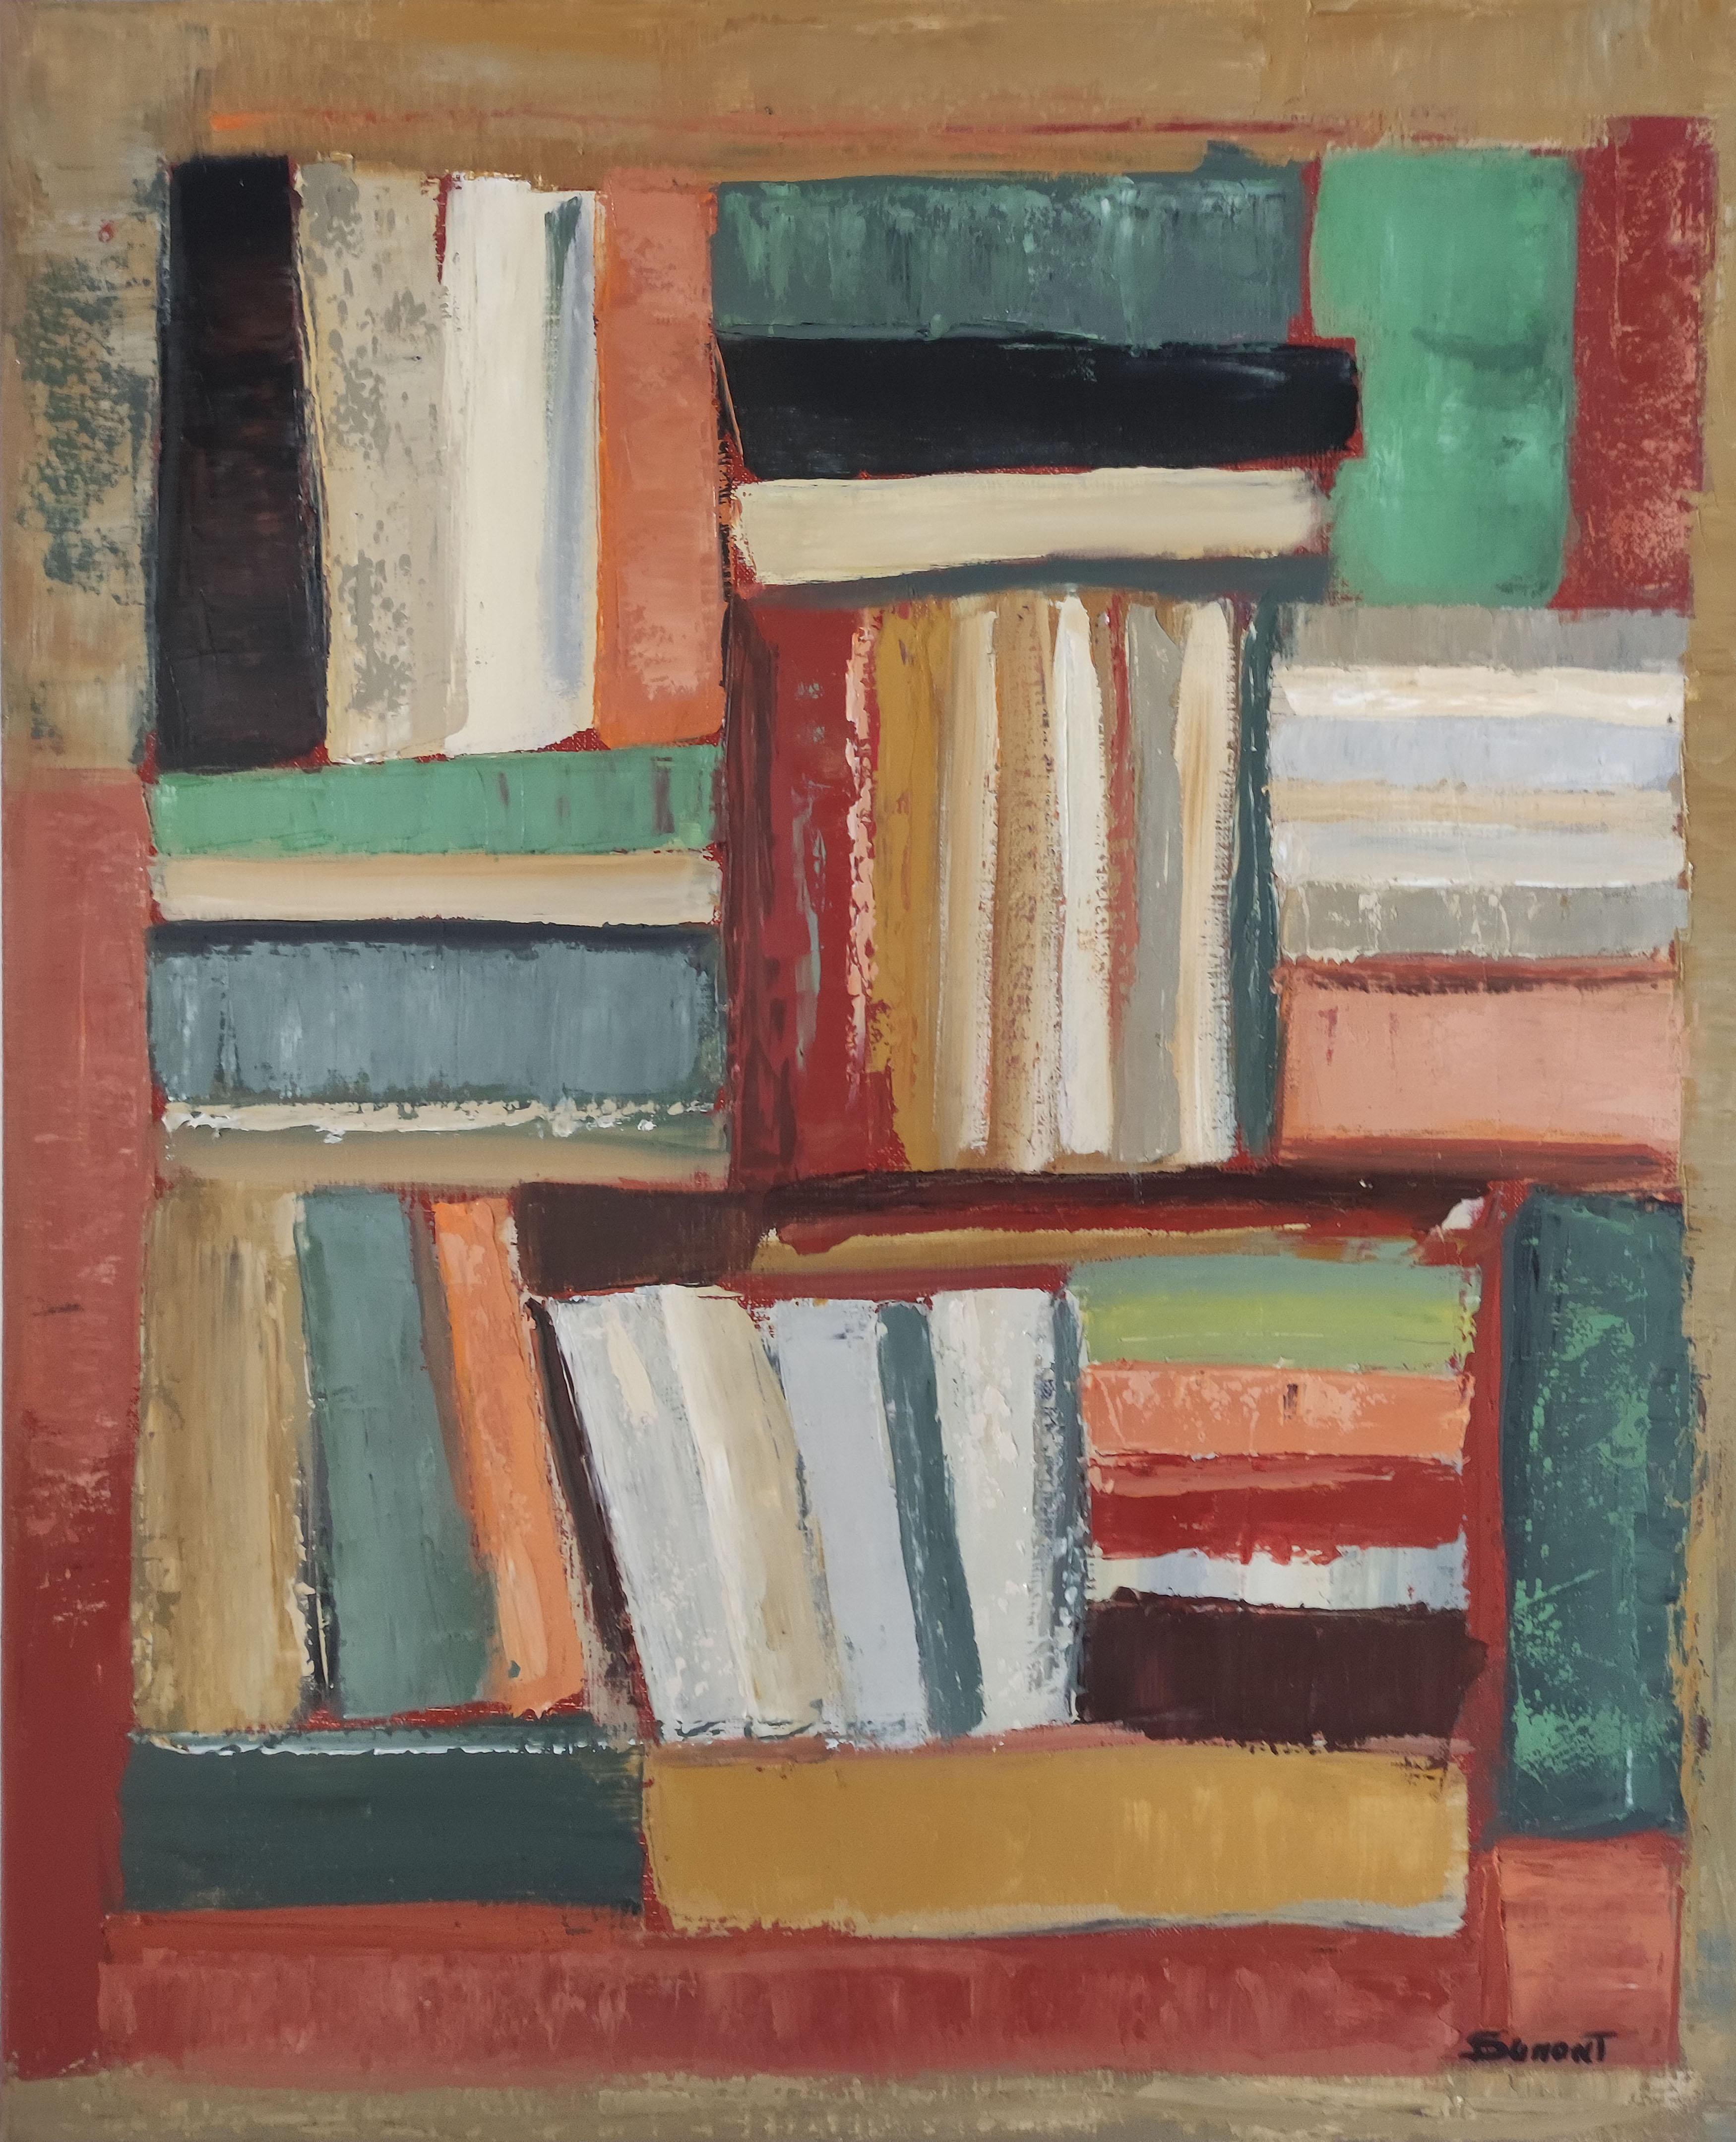 chromatic, colored abstract, books, oil on canvas, expressionism, geometric  - Painting by SOPHIE DUMONT